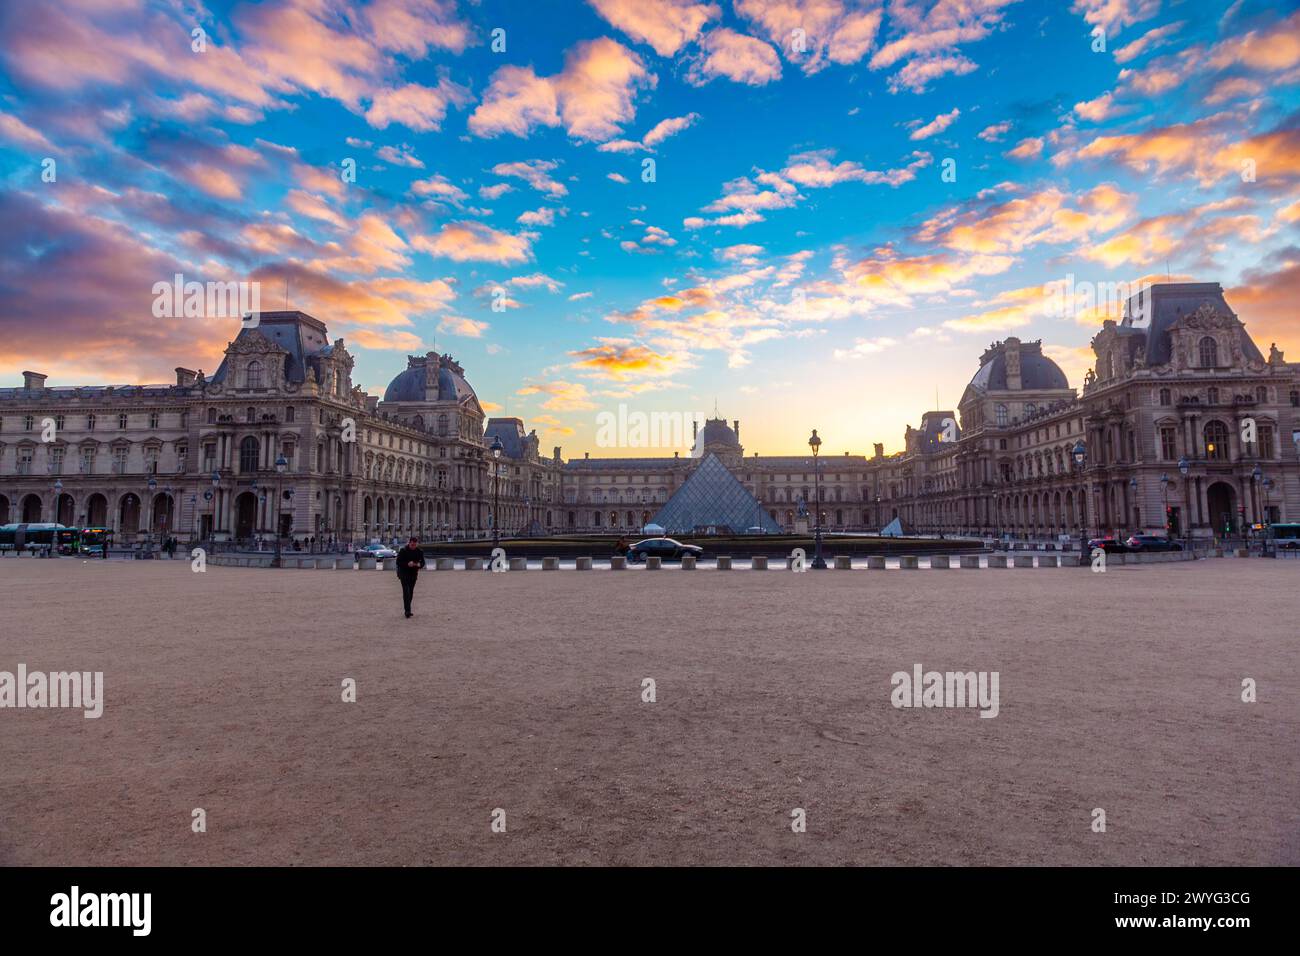 Paris, France - JAN 20, 2022: The glass pyramid of Louvre Museum, the main entrance to famous museum and gallery, completed in 1989. Stock Photo